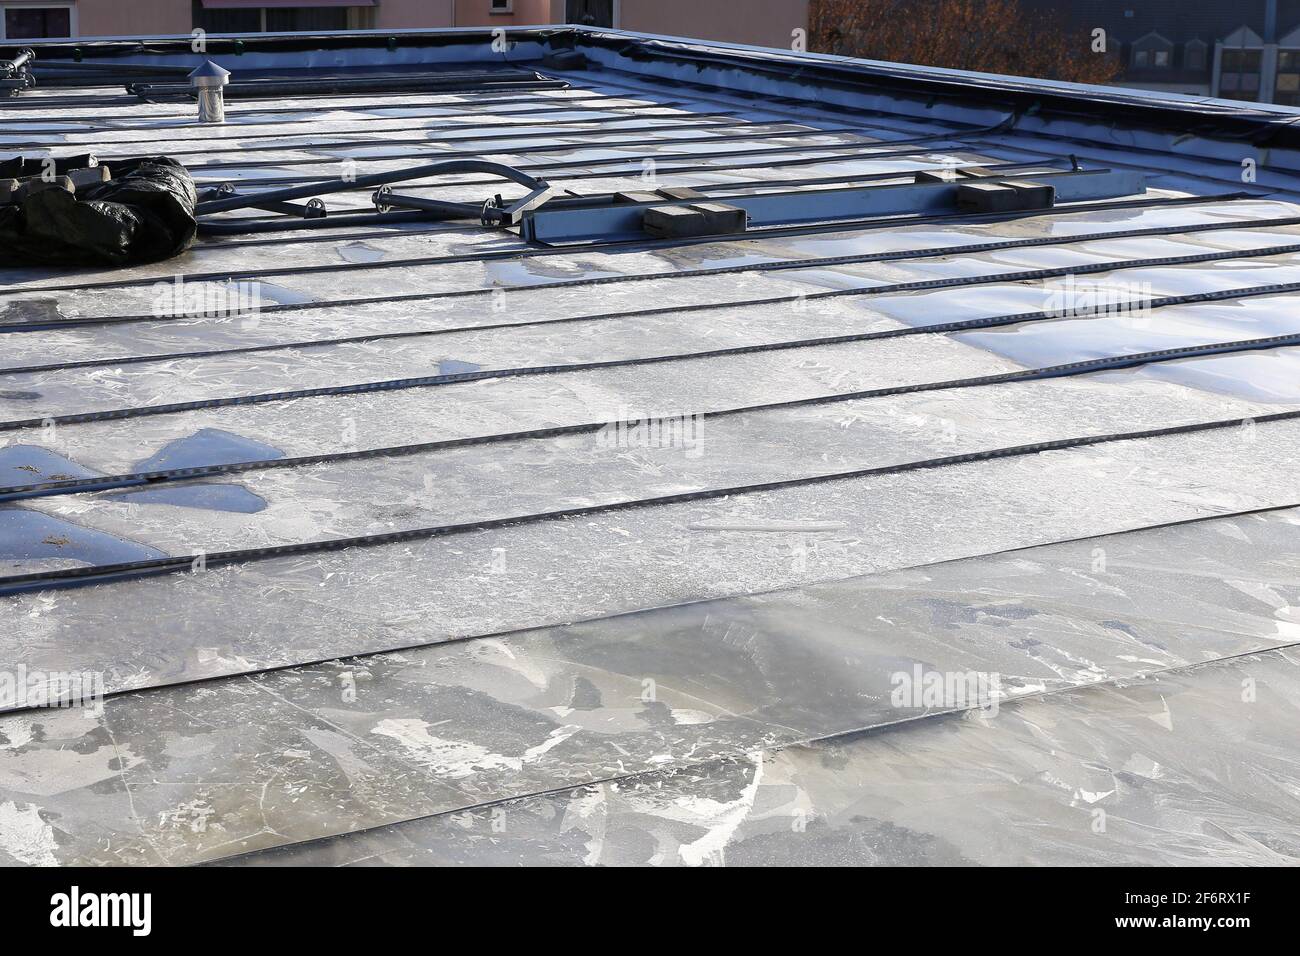 Roll seam welded stainless steel flat roof on a building. Stock Photo